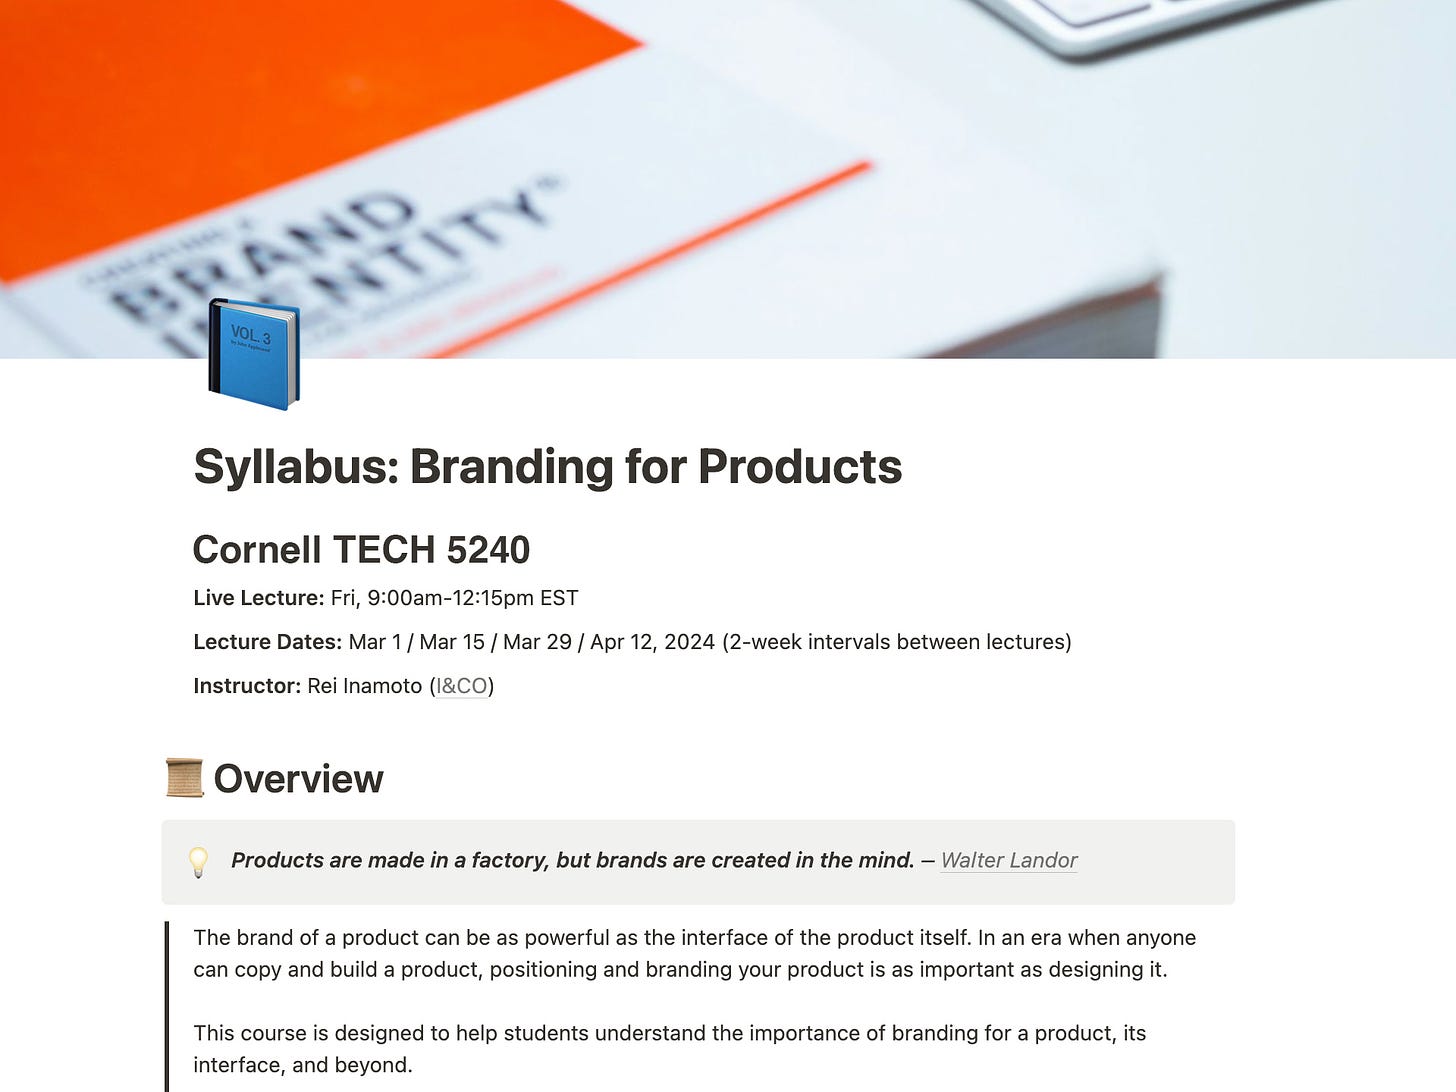 Syllabus for my course “Branding for Products”